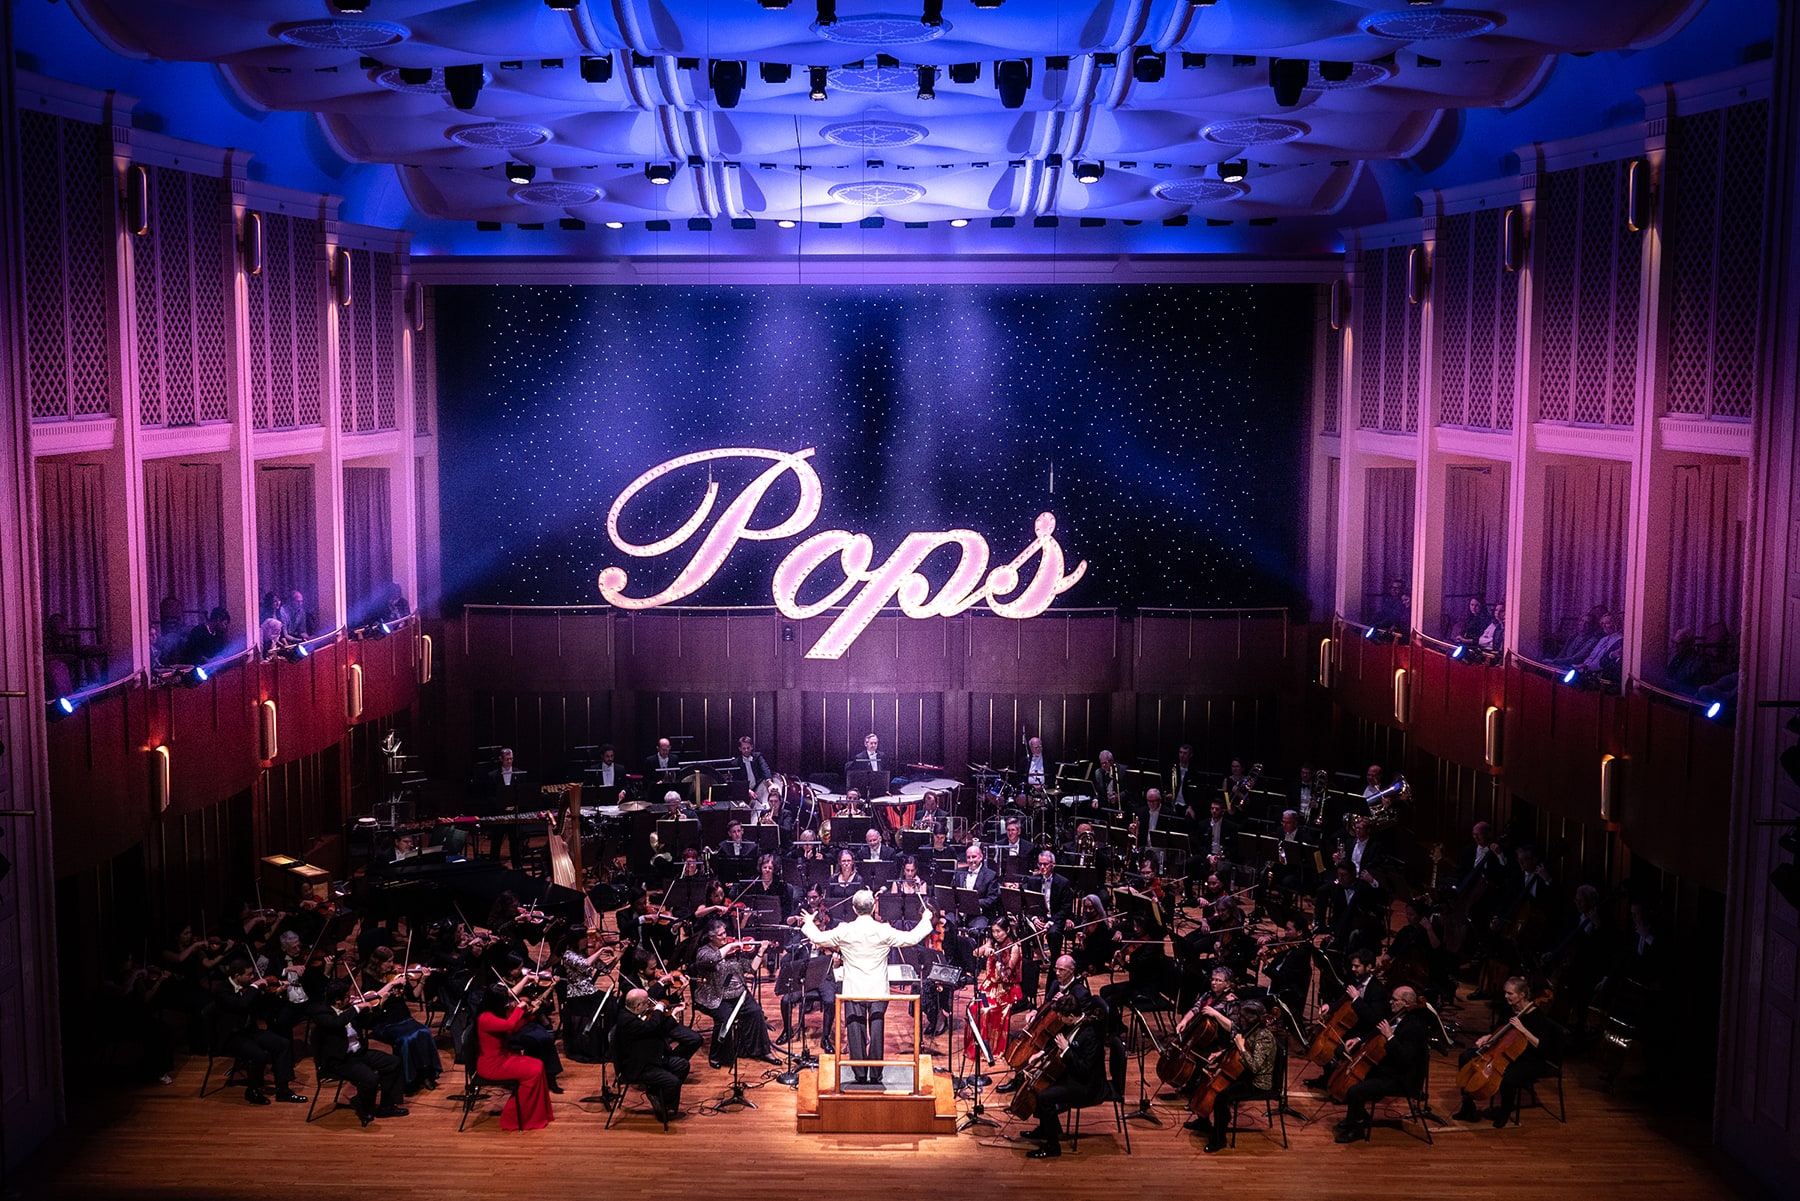 Conductor in front of the entire pops orchestra with dramatic lighting